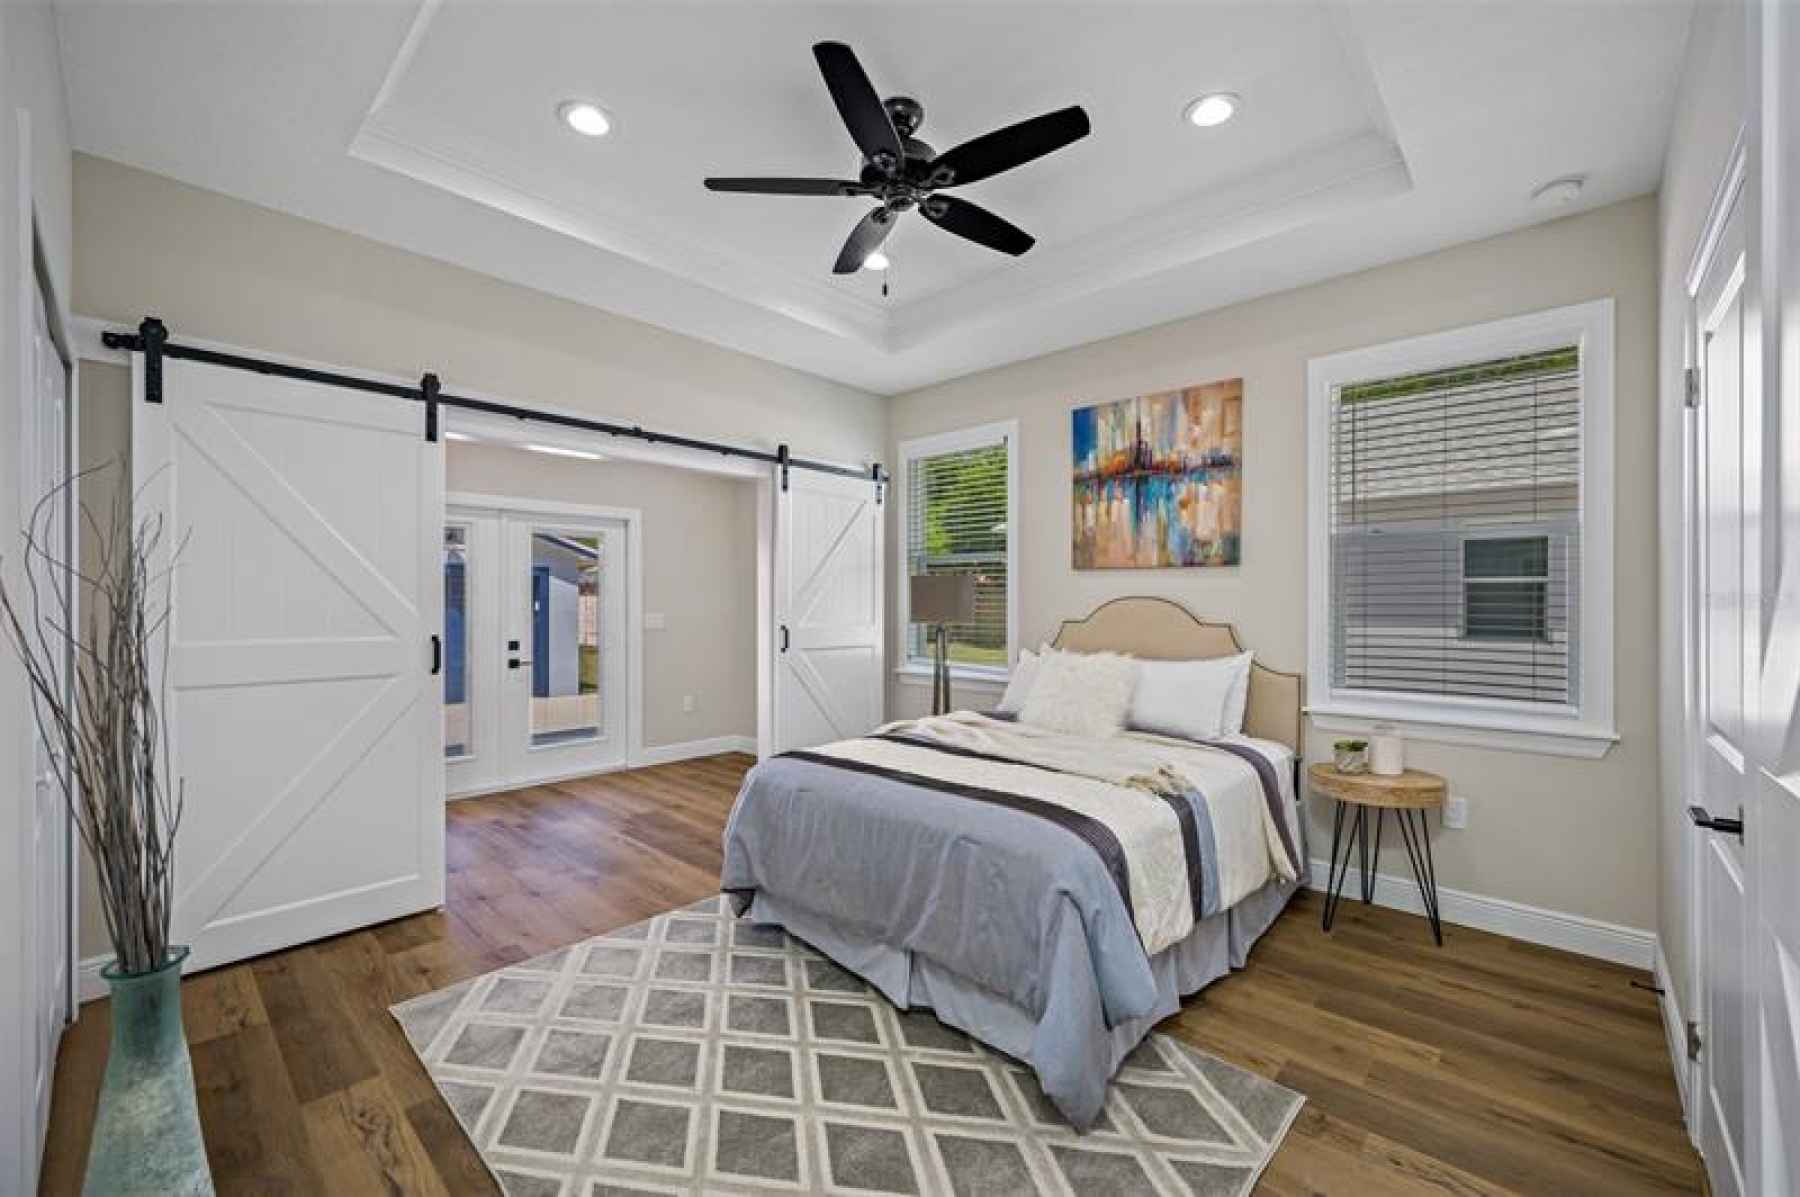 Master Bedroom with Barn doors that flow into attached private office space.